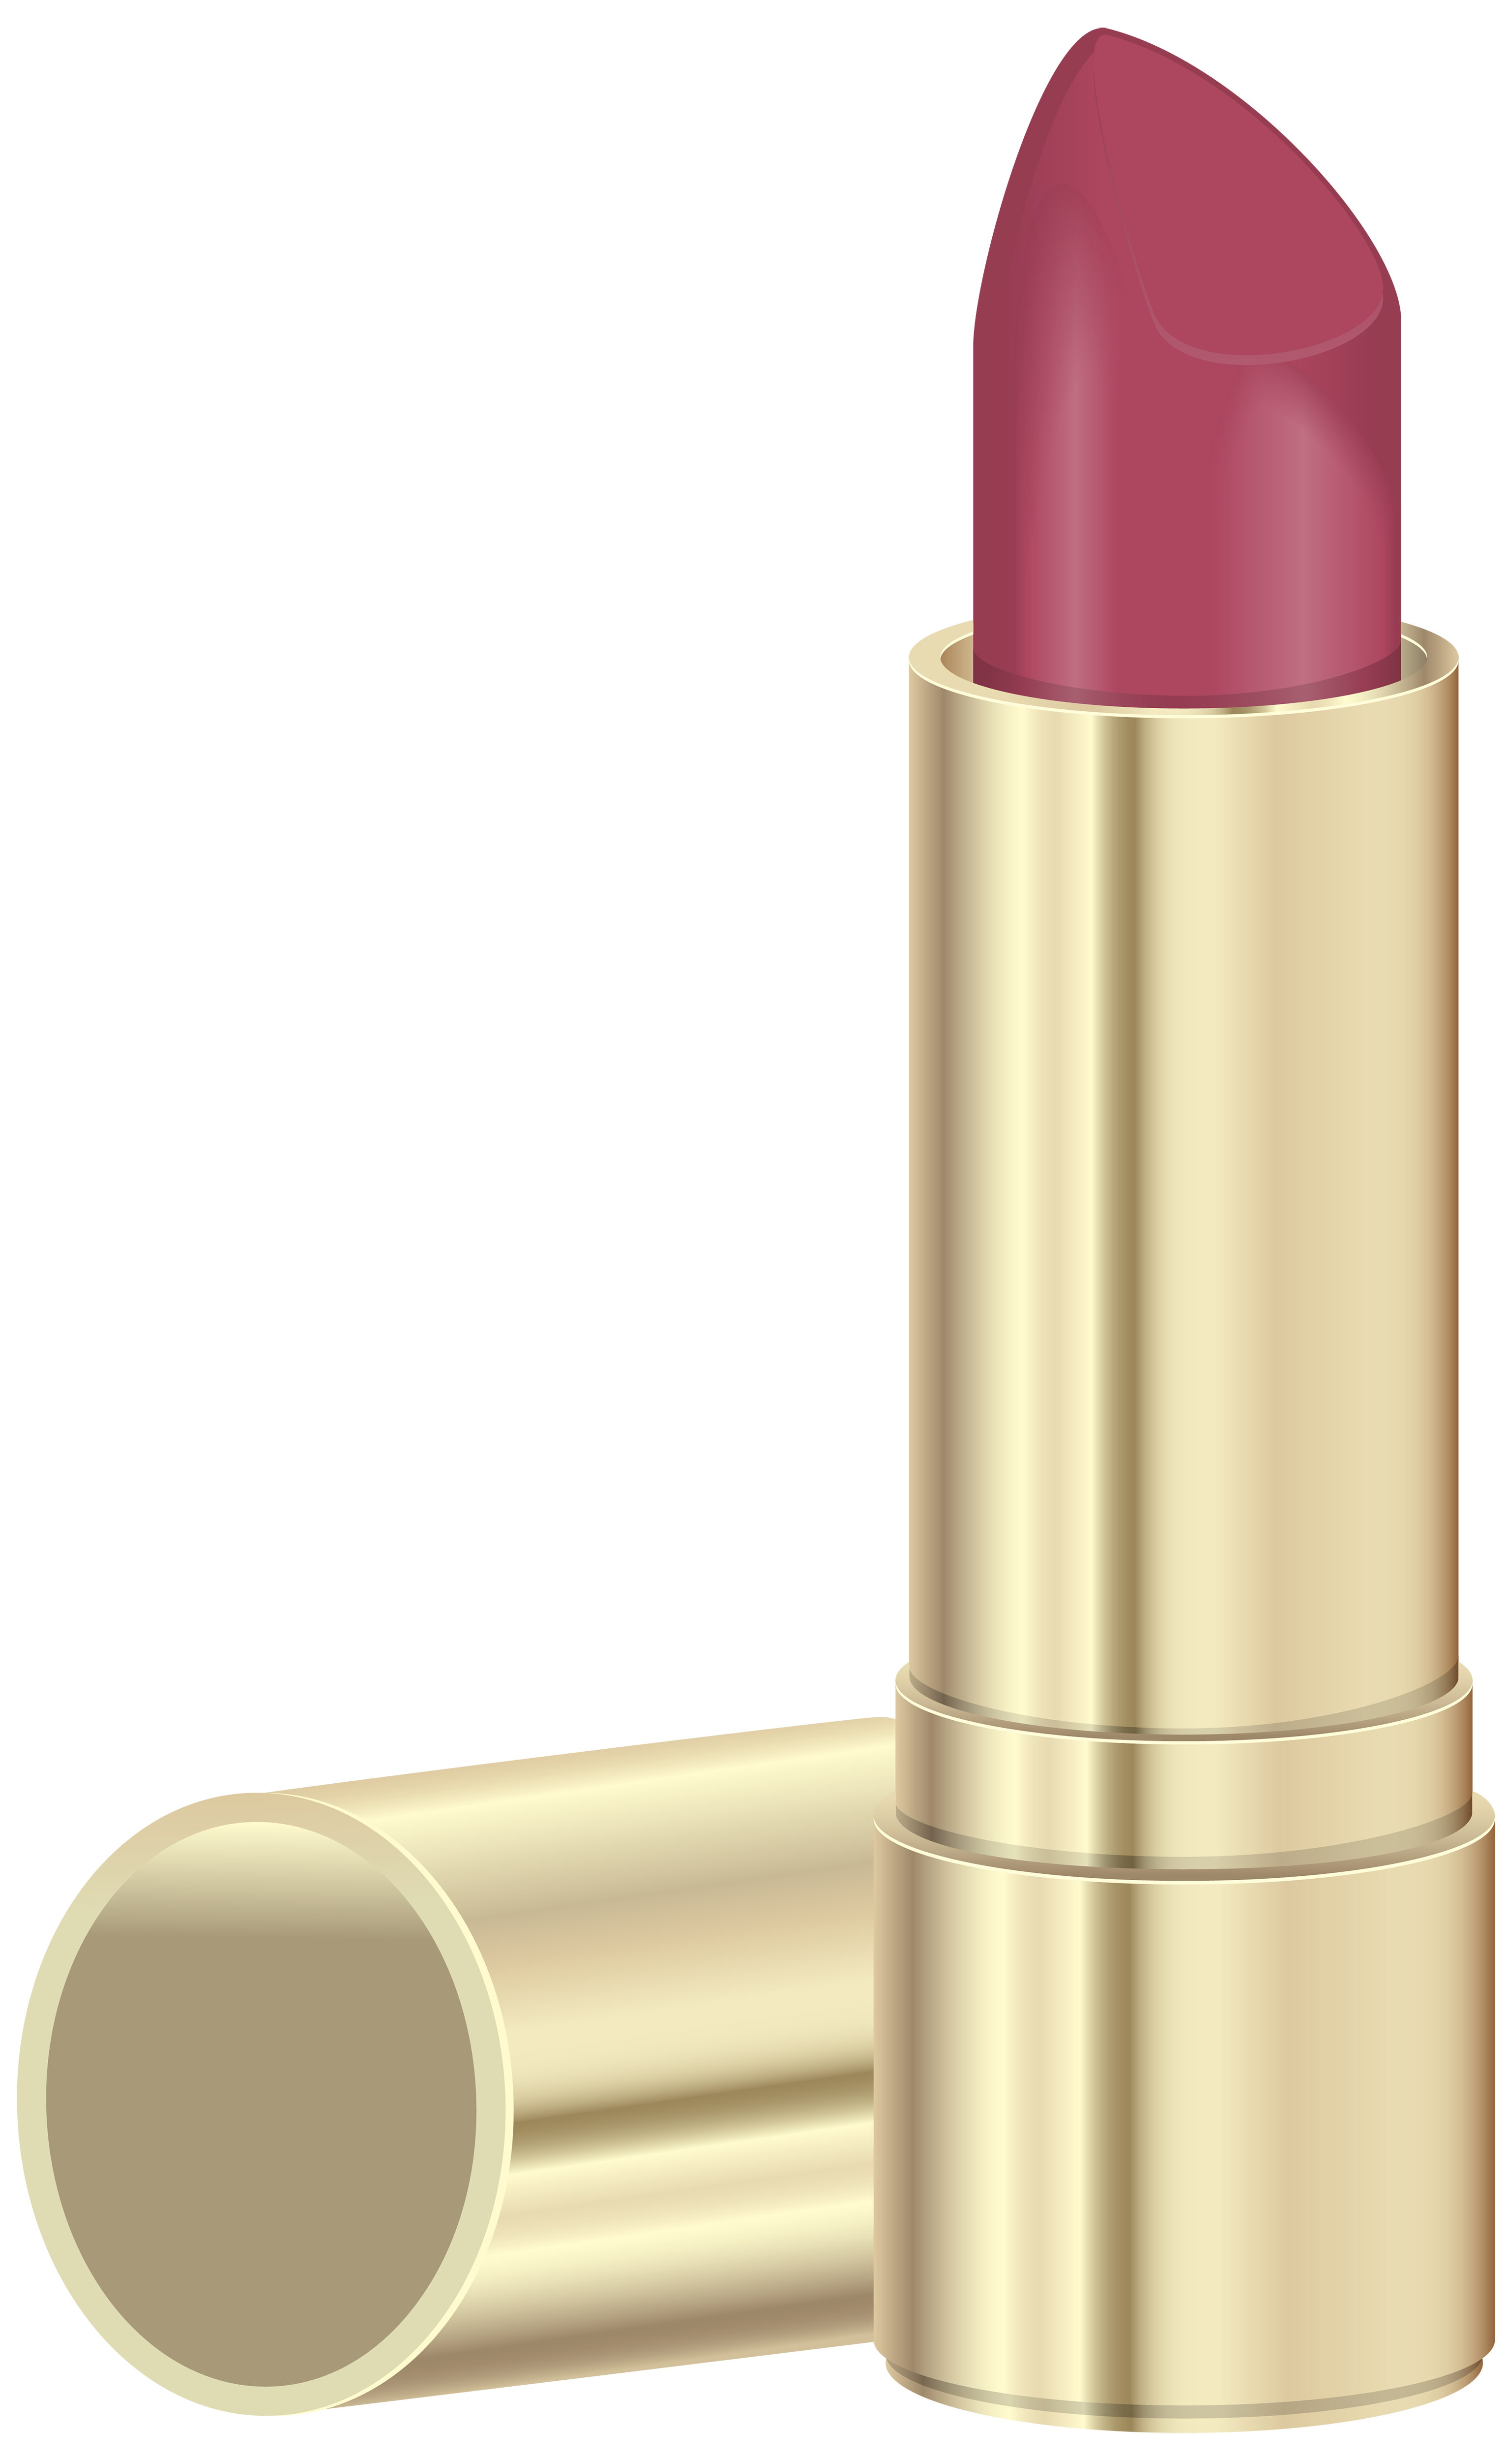 Lipstick clipart clear background 